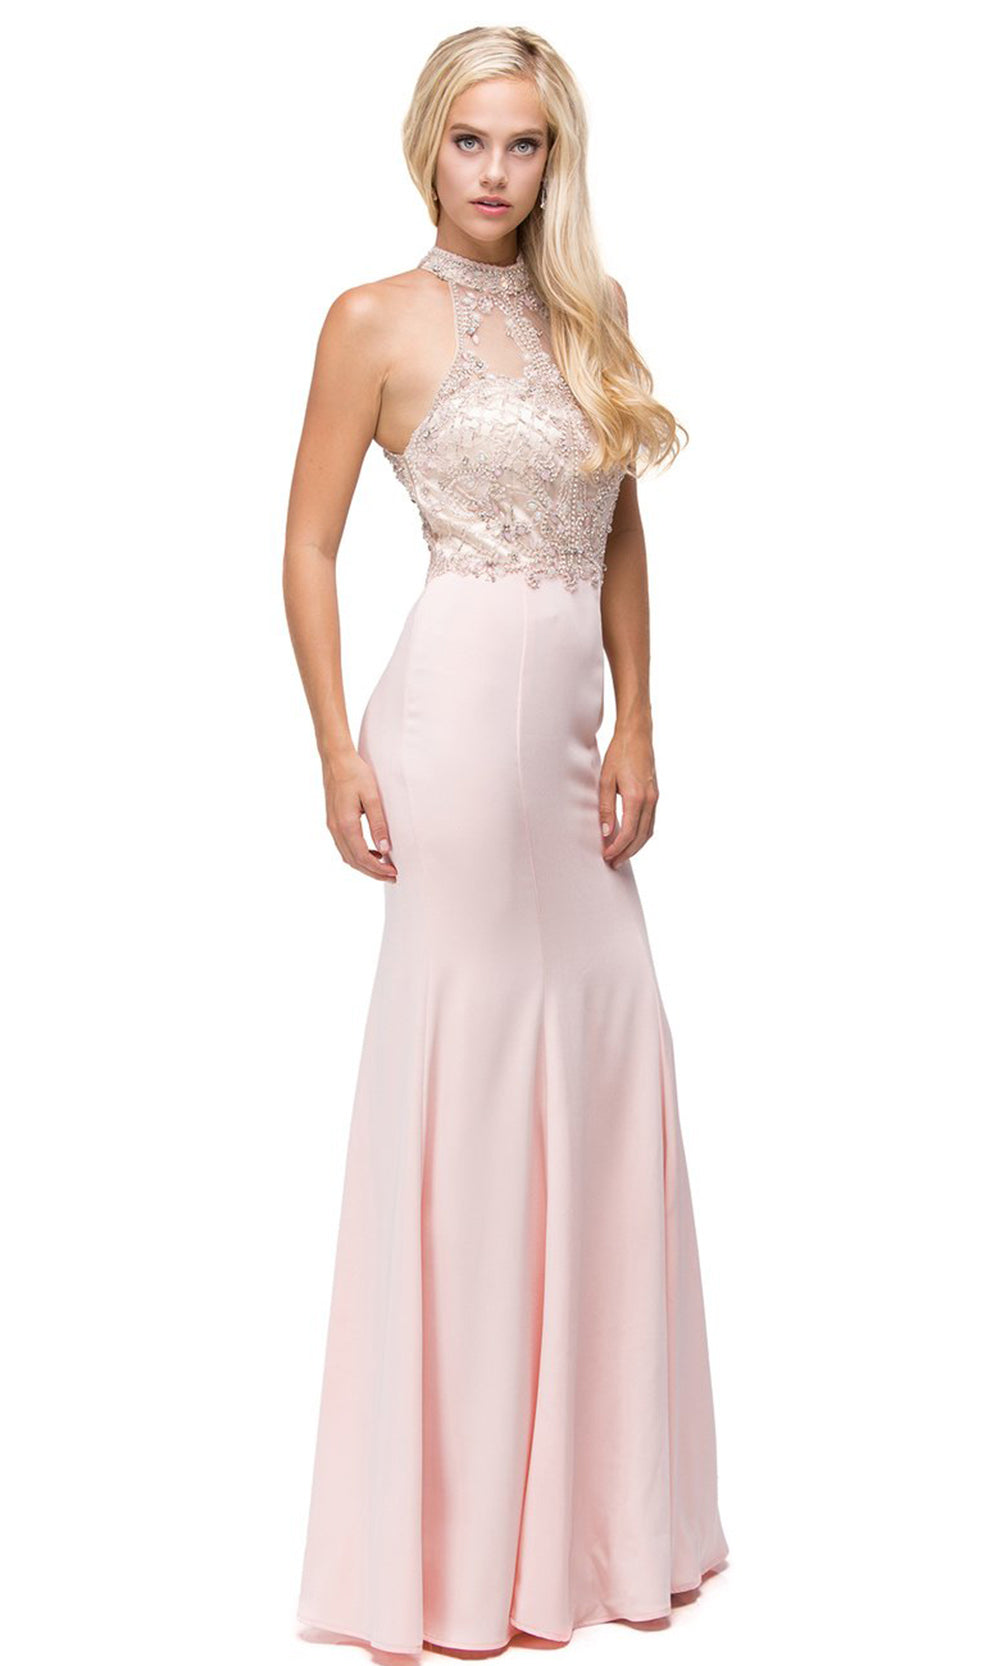 Dancing Queen - 9777 Illusion Embellished Bodice Sheath Dress In Pink